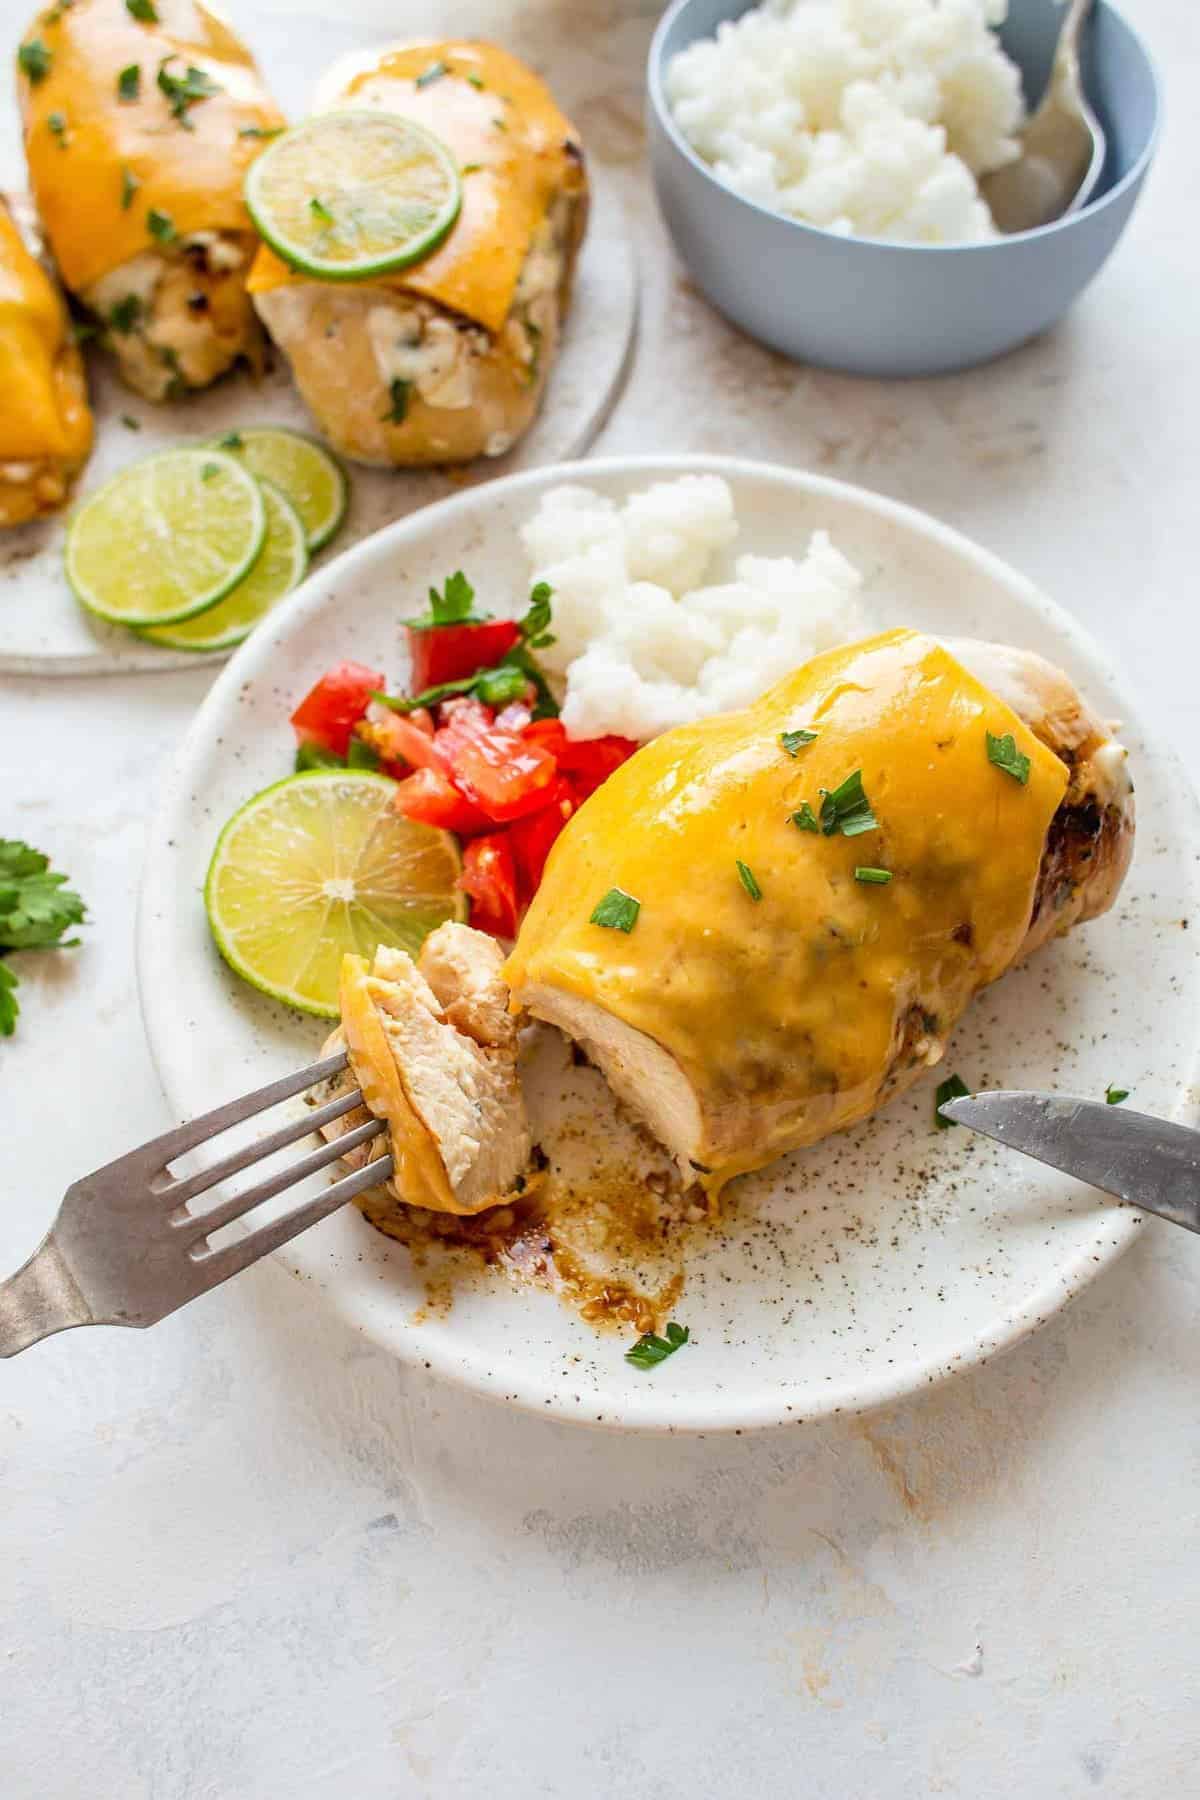 Fiesta Lime Chicken being eaten with a knife and fork